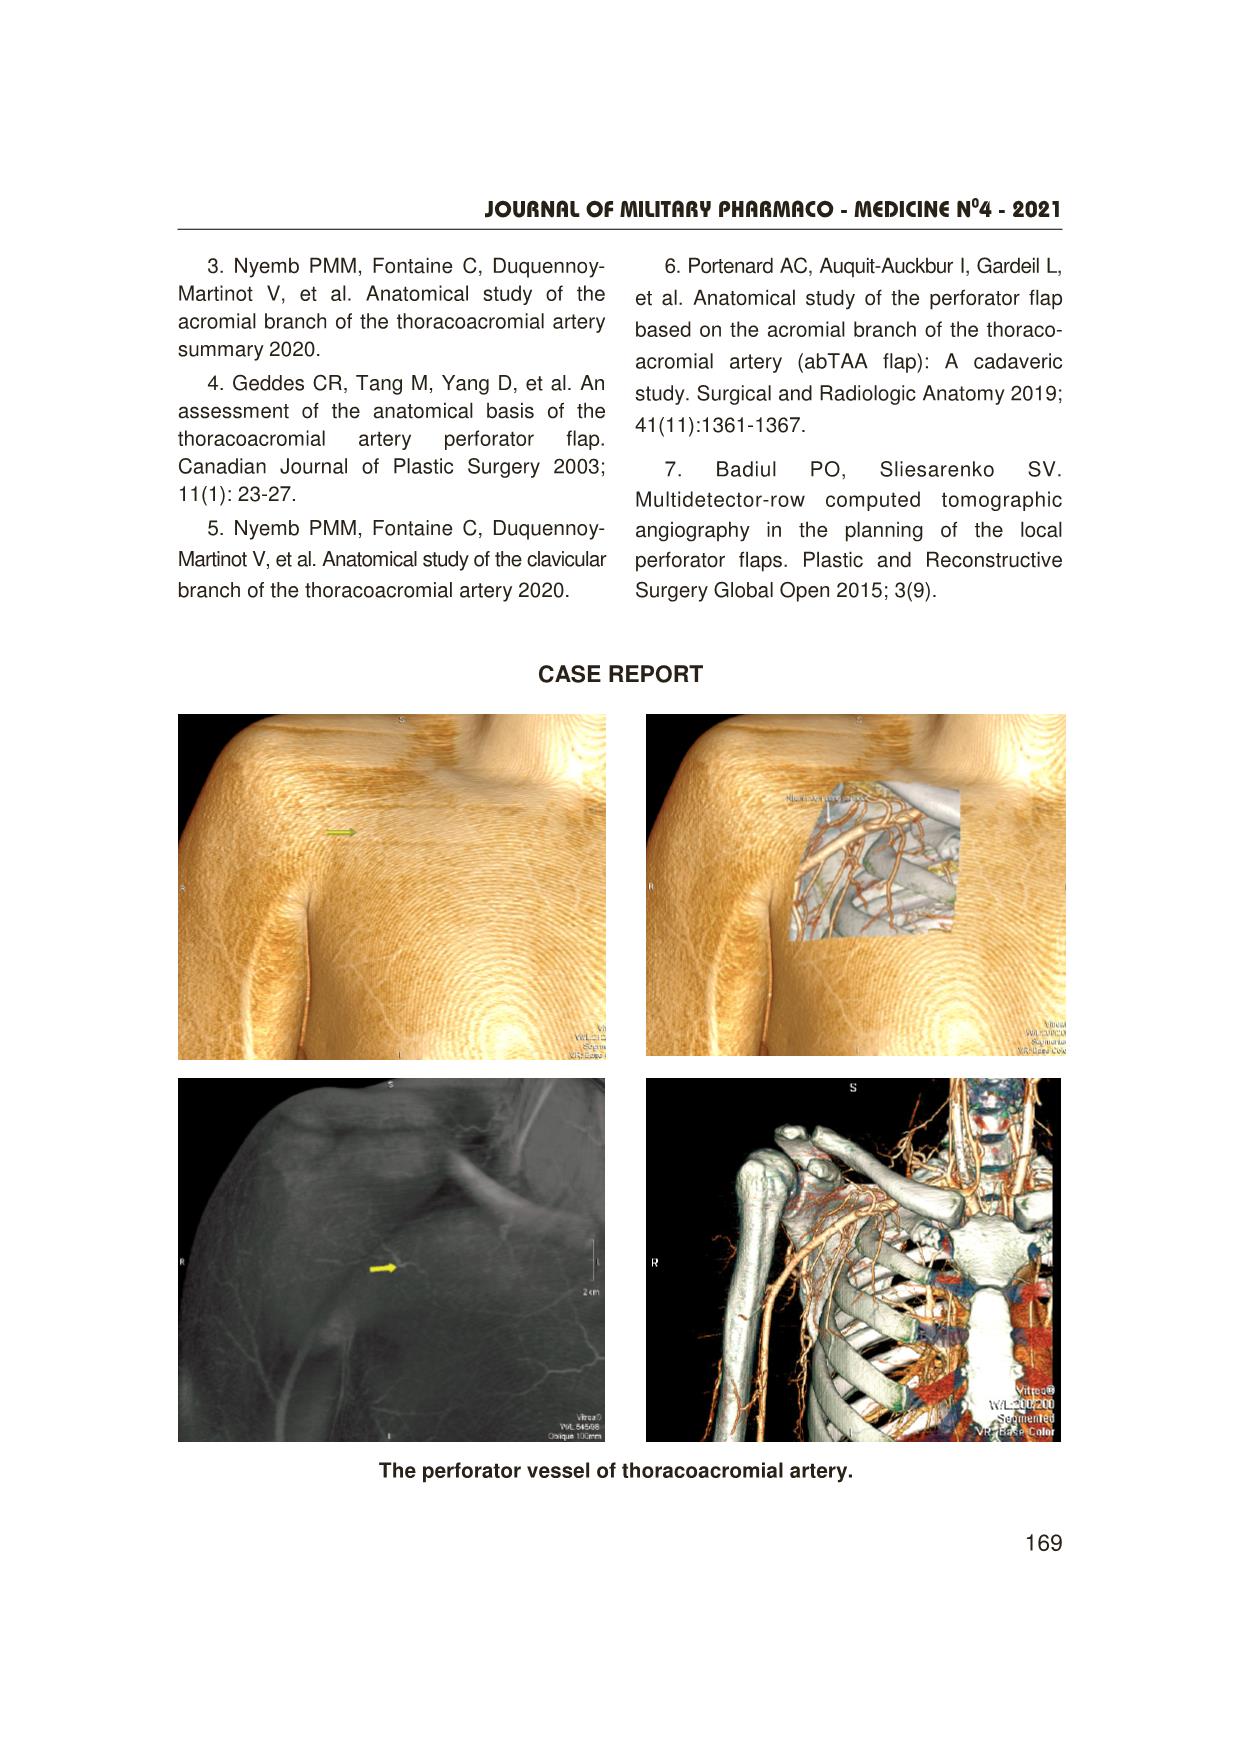 Multidetector-Row computed tomography analysis of the anatomical characteristics of thoracoacromial artery perforator trang 8